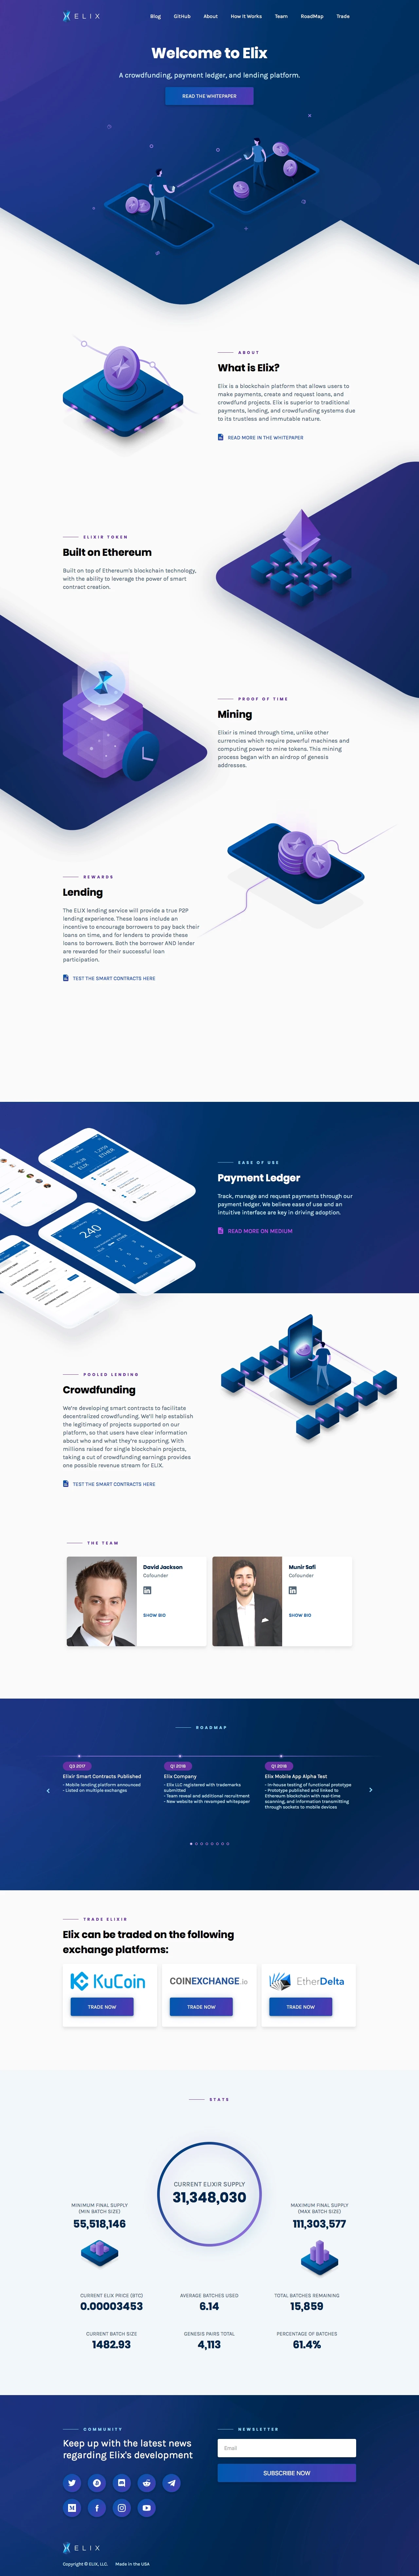 Elix Landing Page Example: Elix is a blockchain platform that allows users to make payments, create and request loans, and crowdfund projects. Elix is superior to traditional payments, lending, and crowdfunding systems due to its trustless and immutable nature.